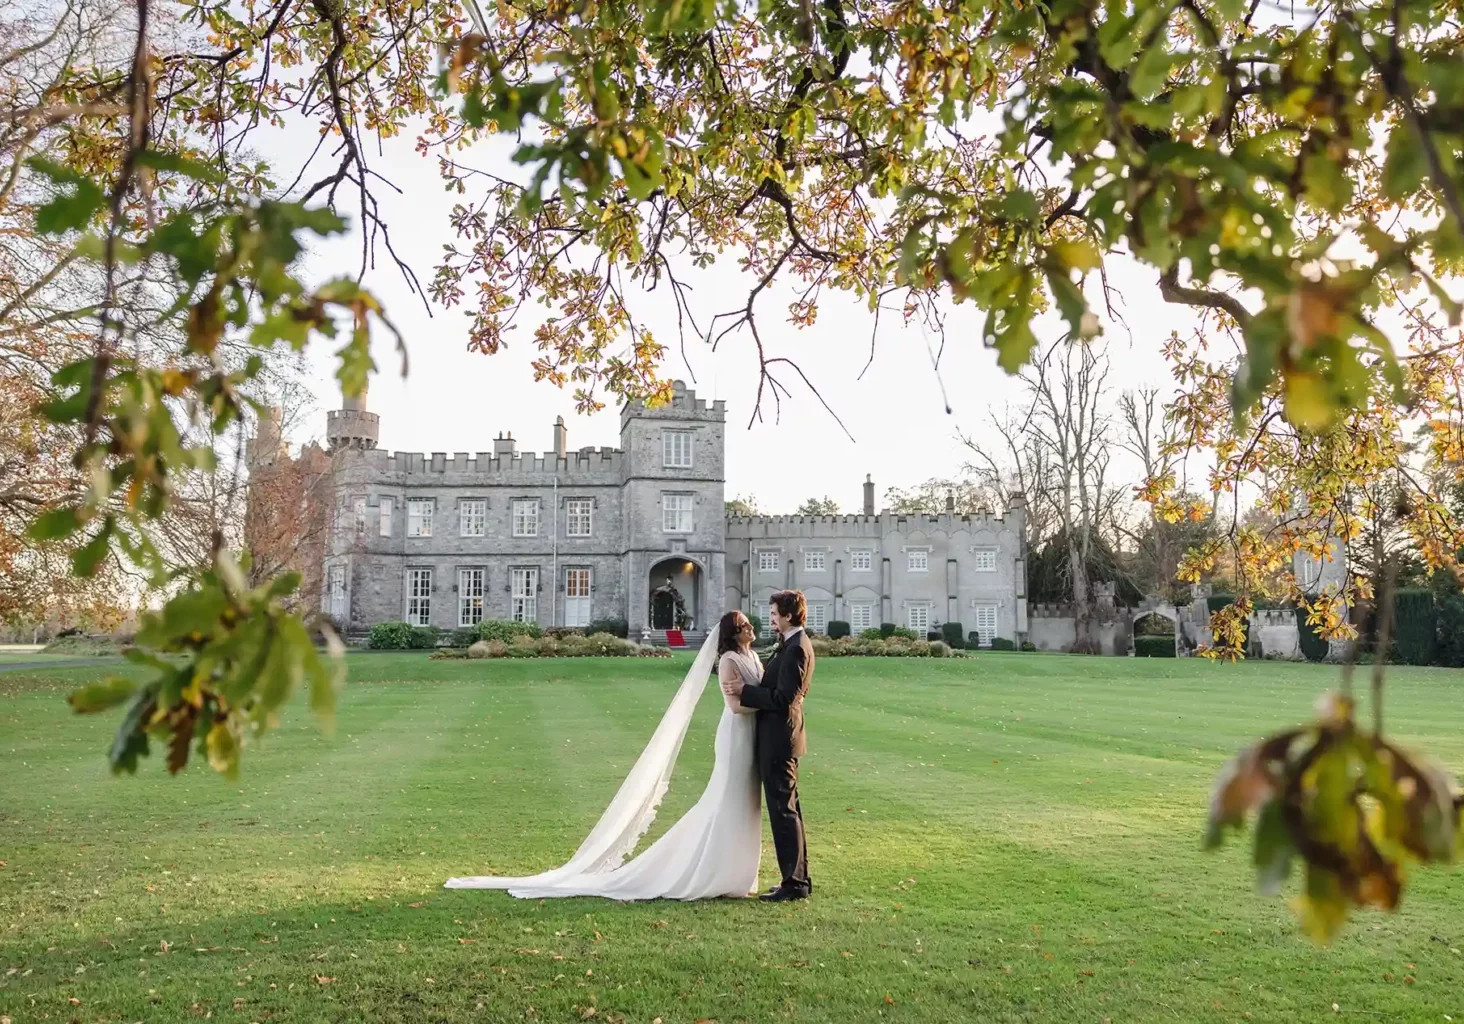 Married couple kissing on the lawn with Luttrellstown Castle in the background